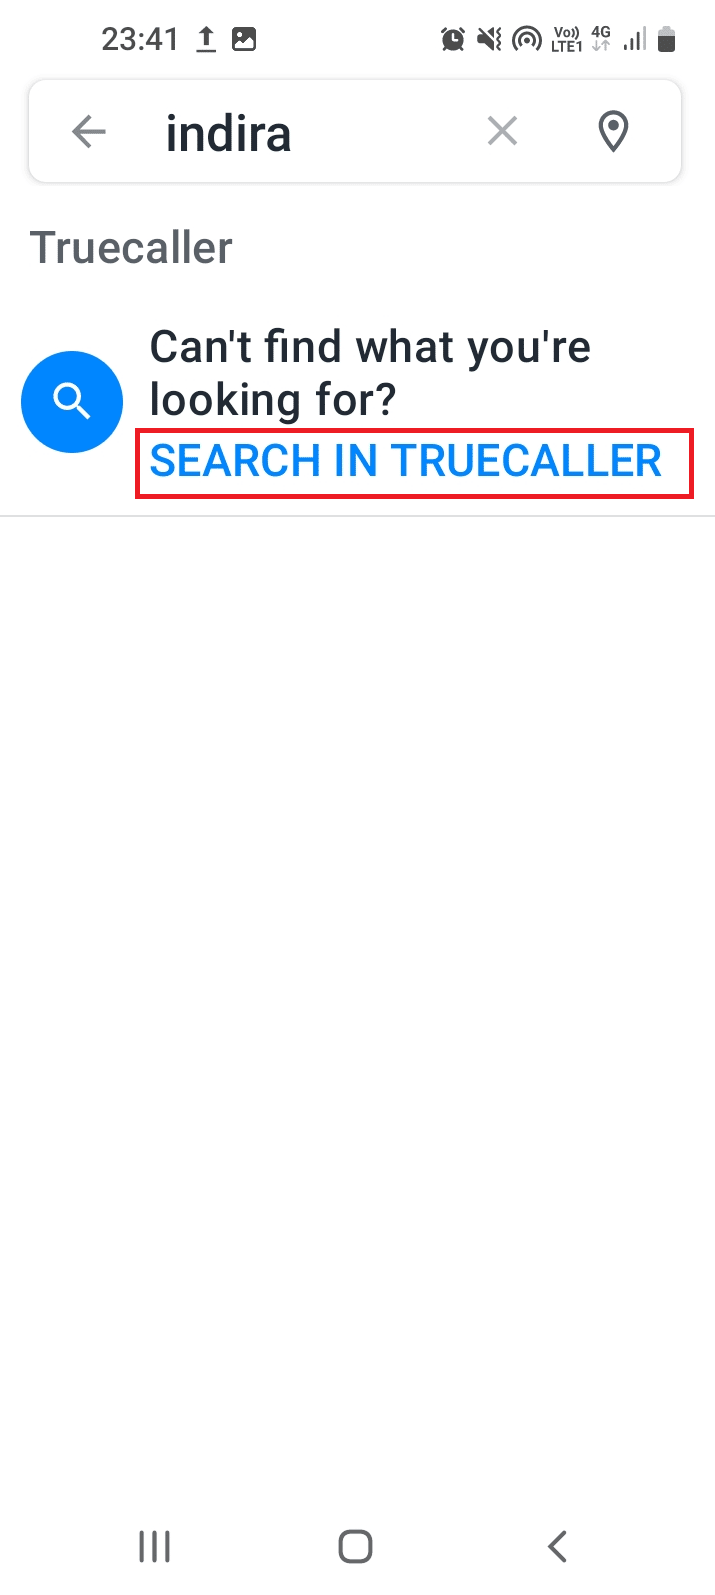 Search for the name of the person using the search bar and tap on the SEARCH IN TRUECALLER option